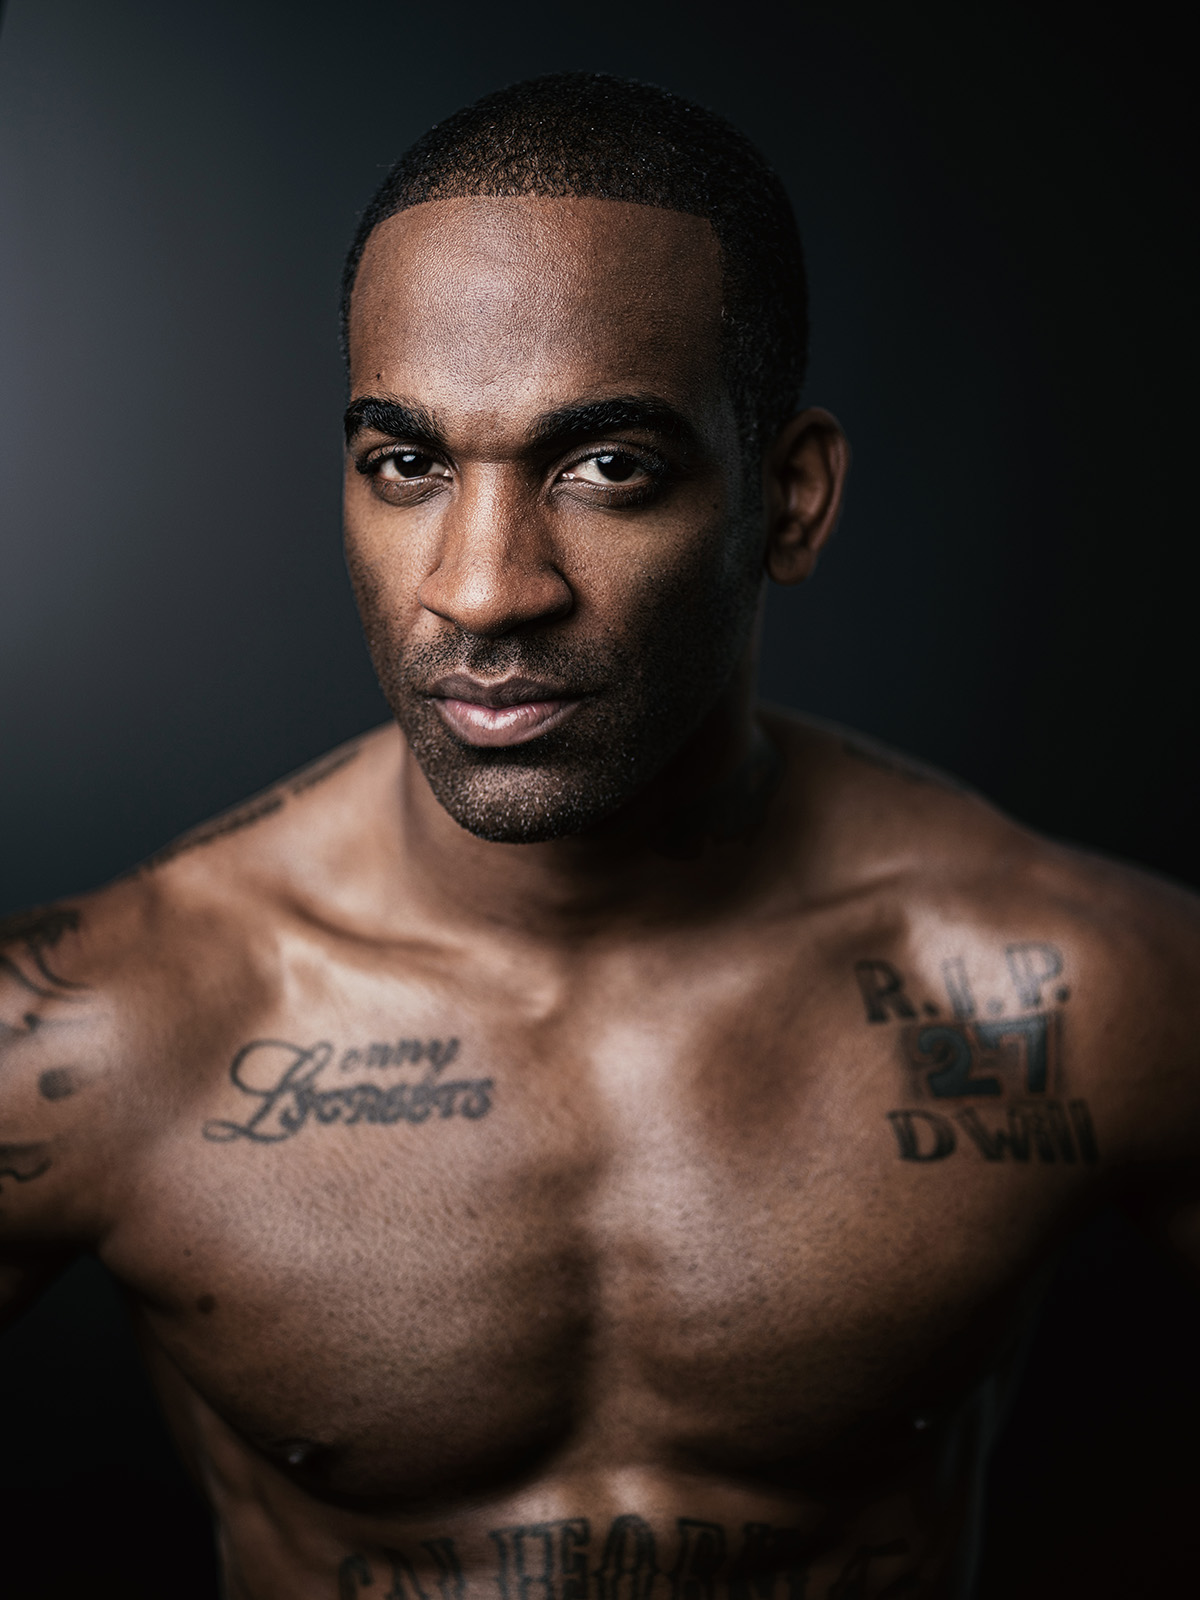 Lenny Walls, a retired NFL football player, poses for a portrait in Josh Huskin